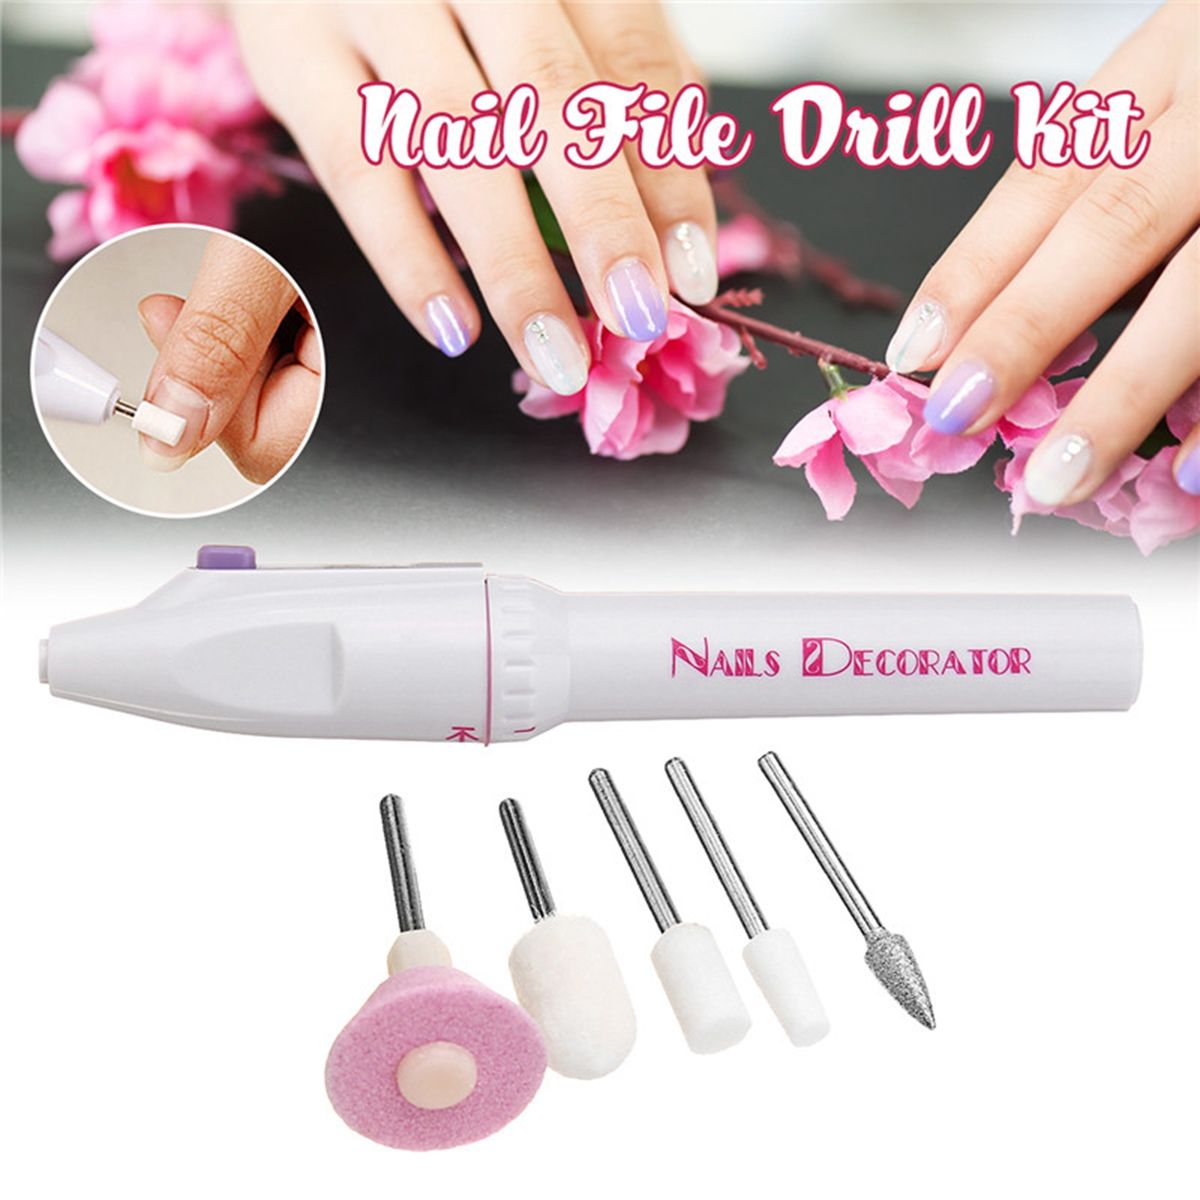 Electric-Machine-Manicure-Pedicure-File-Polish-Nail-Art-Tools-Kit-with-5-Grinding-Heads-1355378